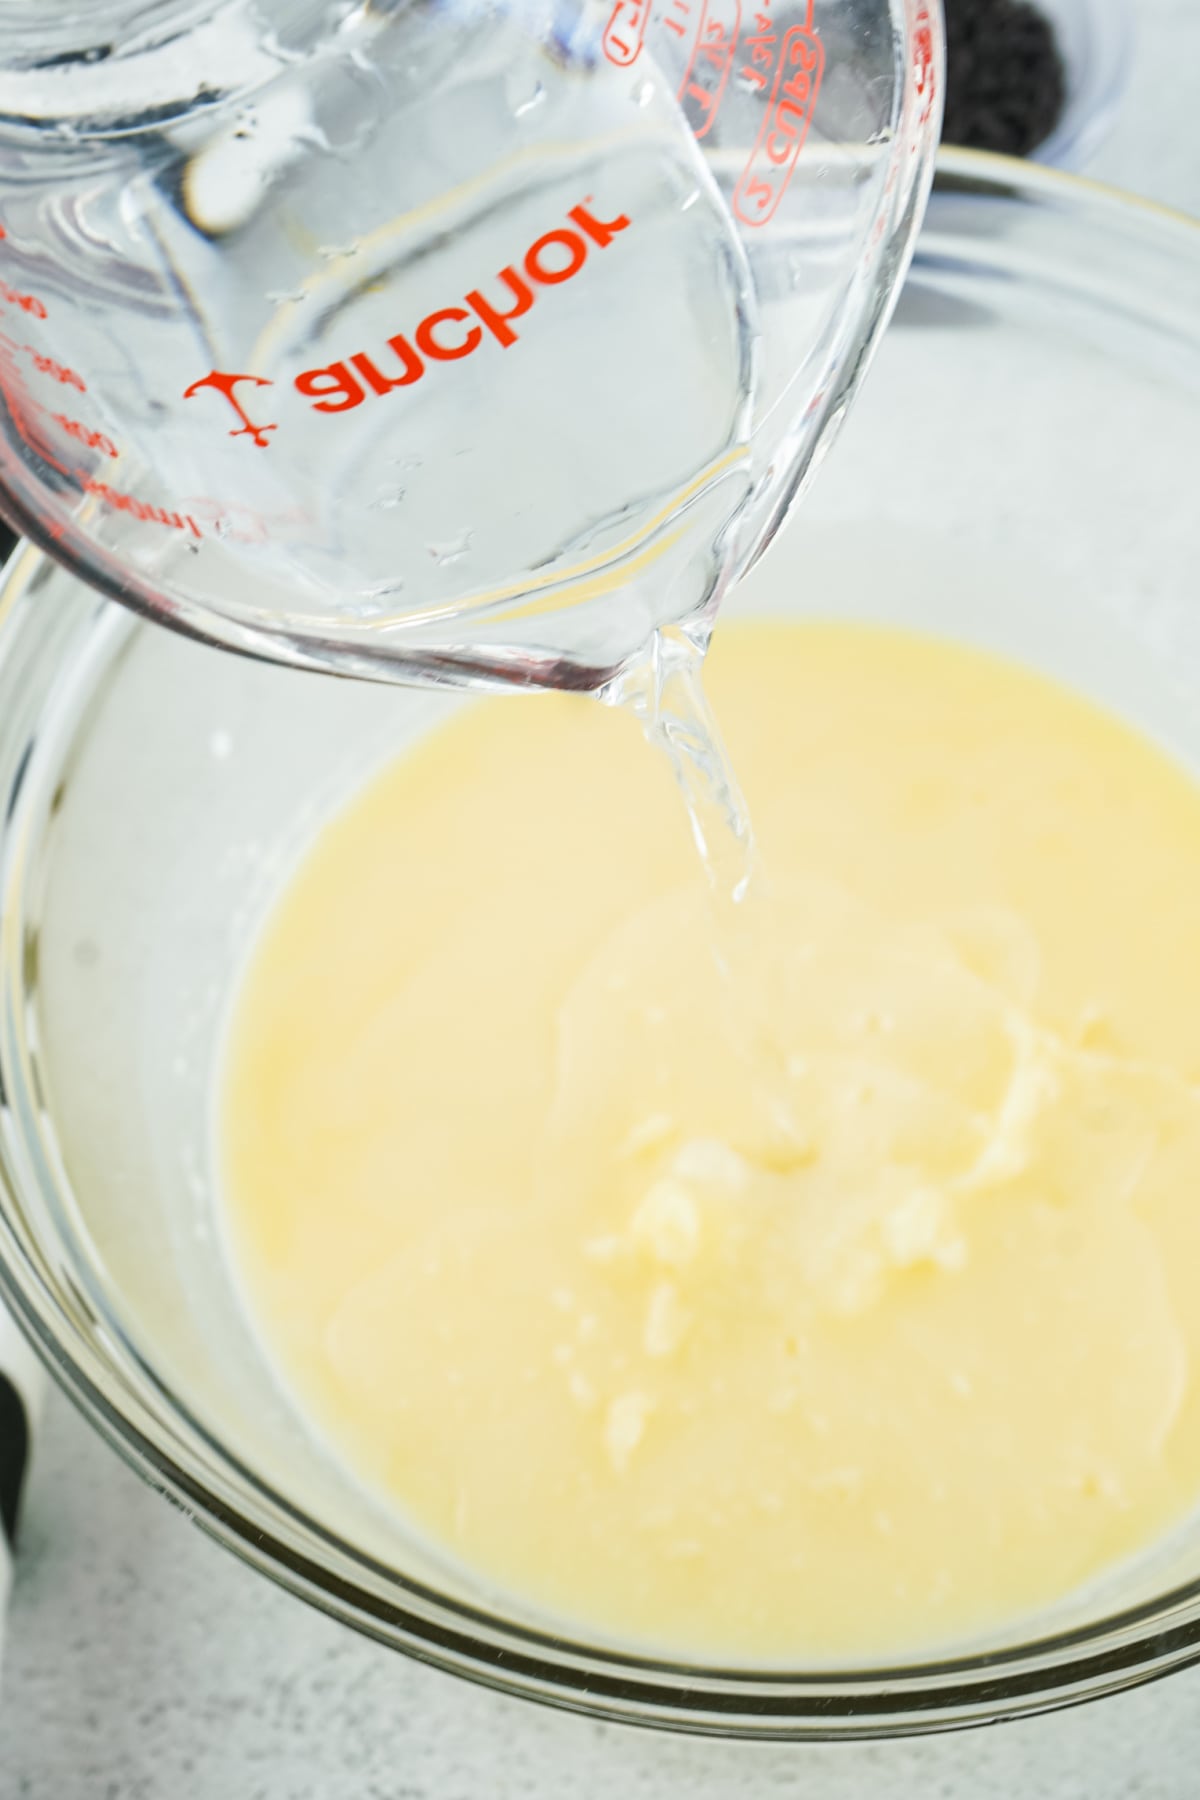 Vodka being mixed with pudding